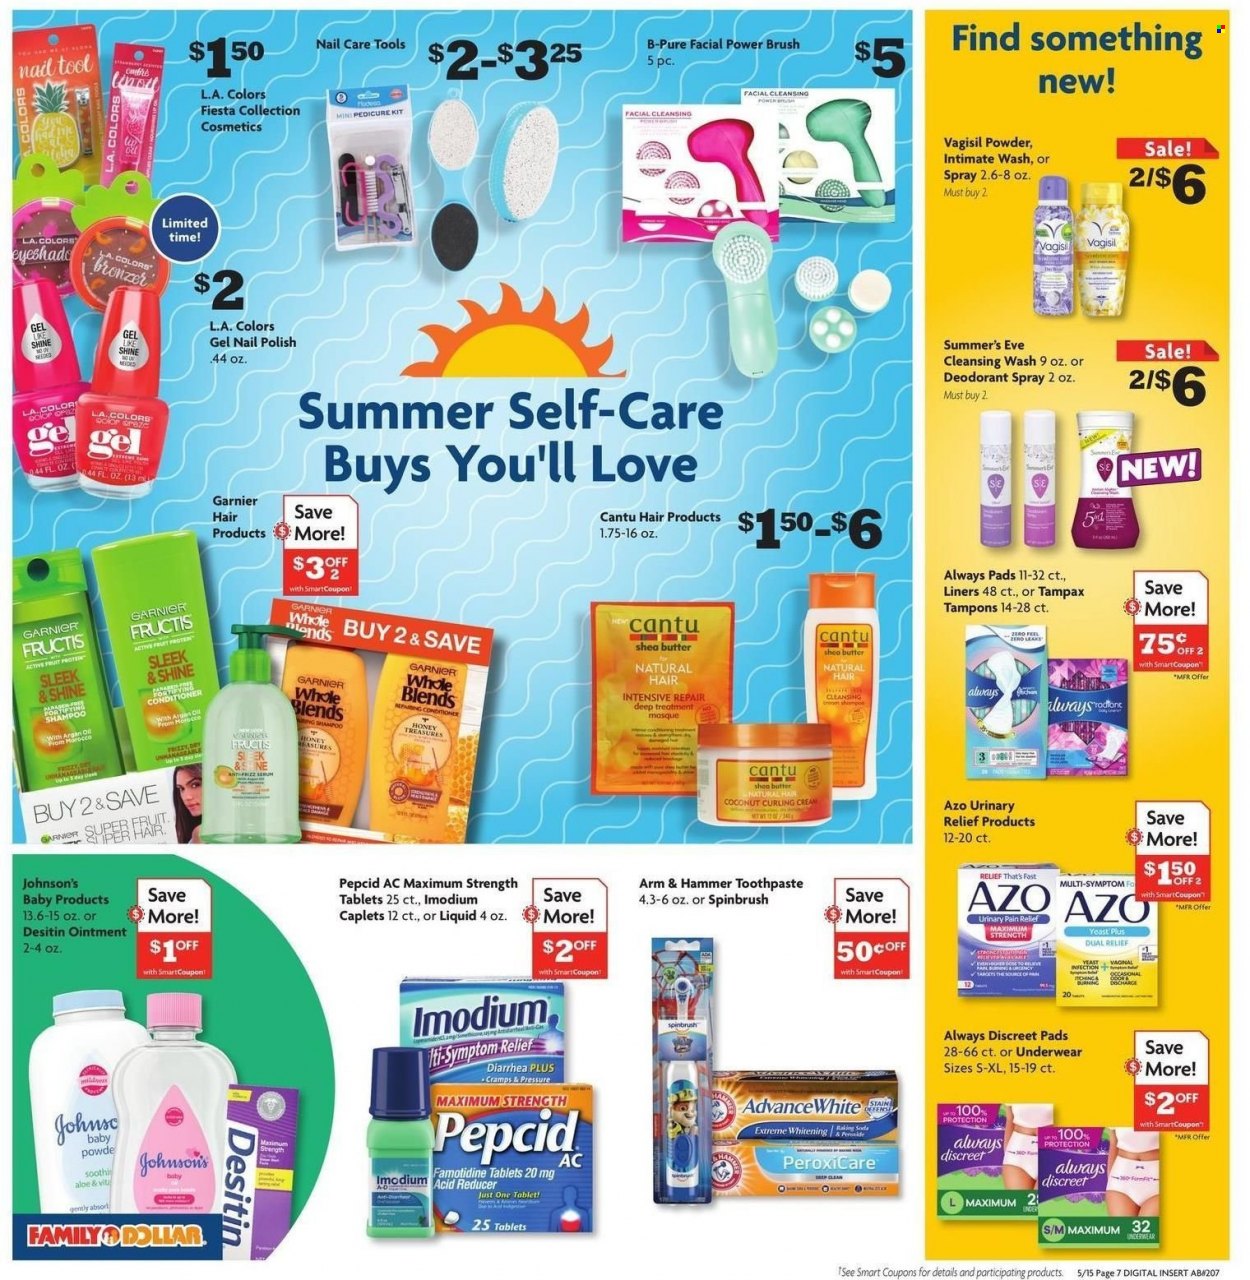 thumbnail - Family Dollar Flyer - 05/15/2022 - 05/28/2022 - Sales products - tablet, yeast, ARM & HAMMER, soda, Johnson's, ointment, shampoo, toothpaste, Tampax, Always pads, sanitary pads, Always Discreet, tampons, Garnier, conditioner, treatment masque, Fructis, shea butter, anti-perspirant, deodorant, polish, pedicure tool, bronzing powder, pain relief, Imodium, Pepcid, Desitin. Page 10.